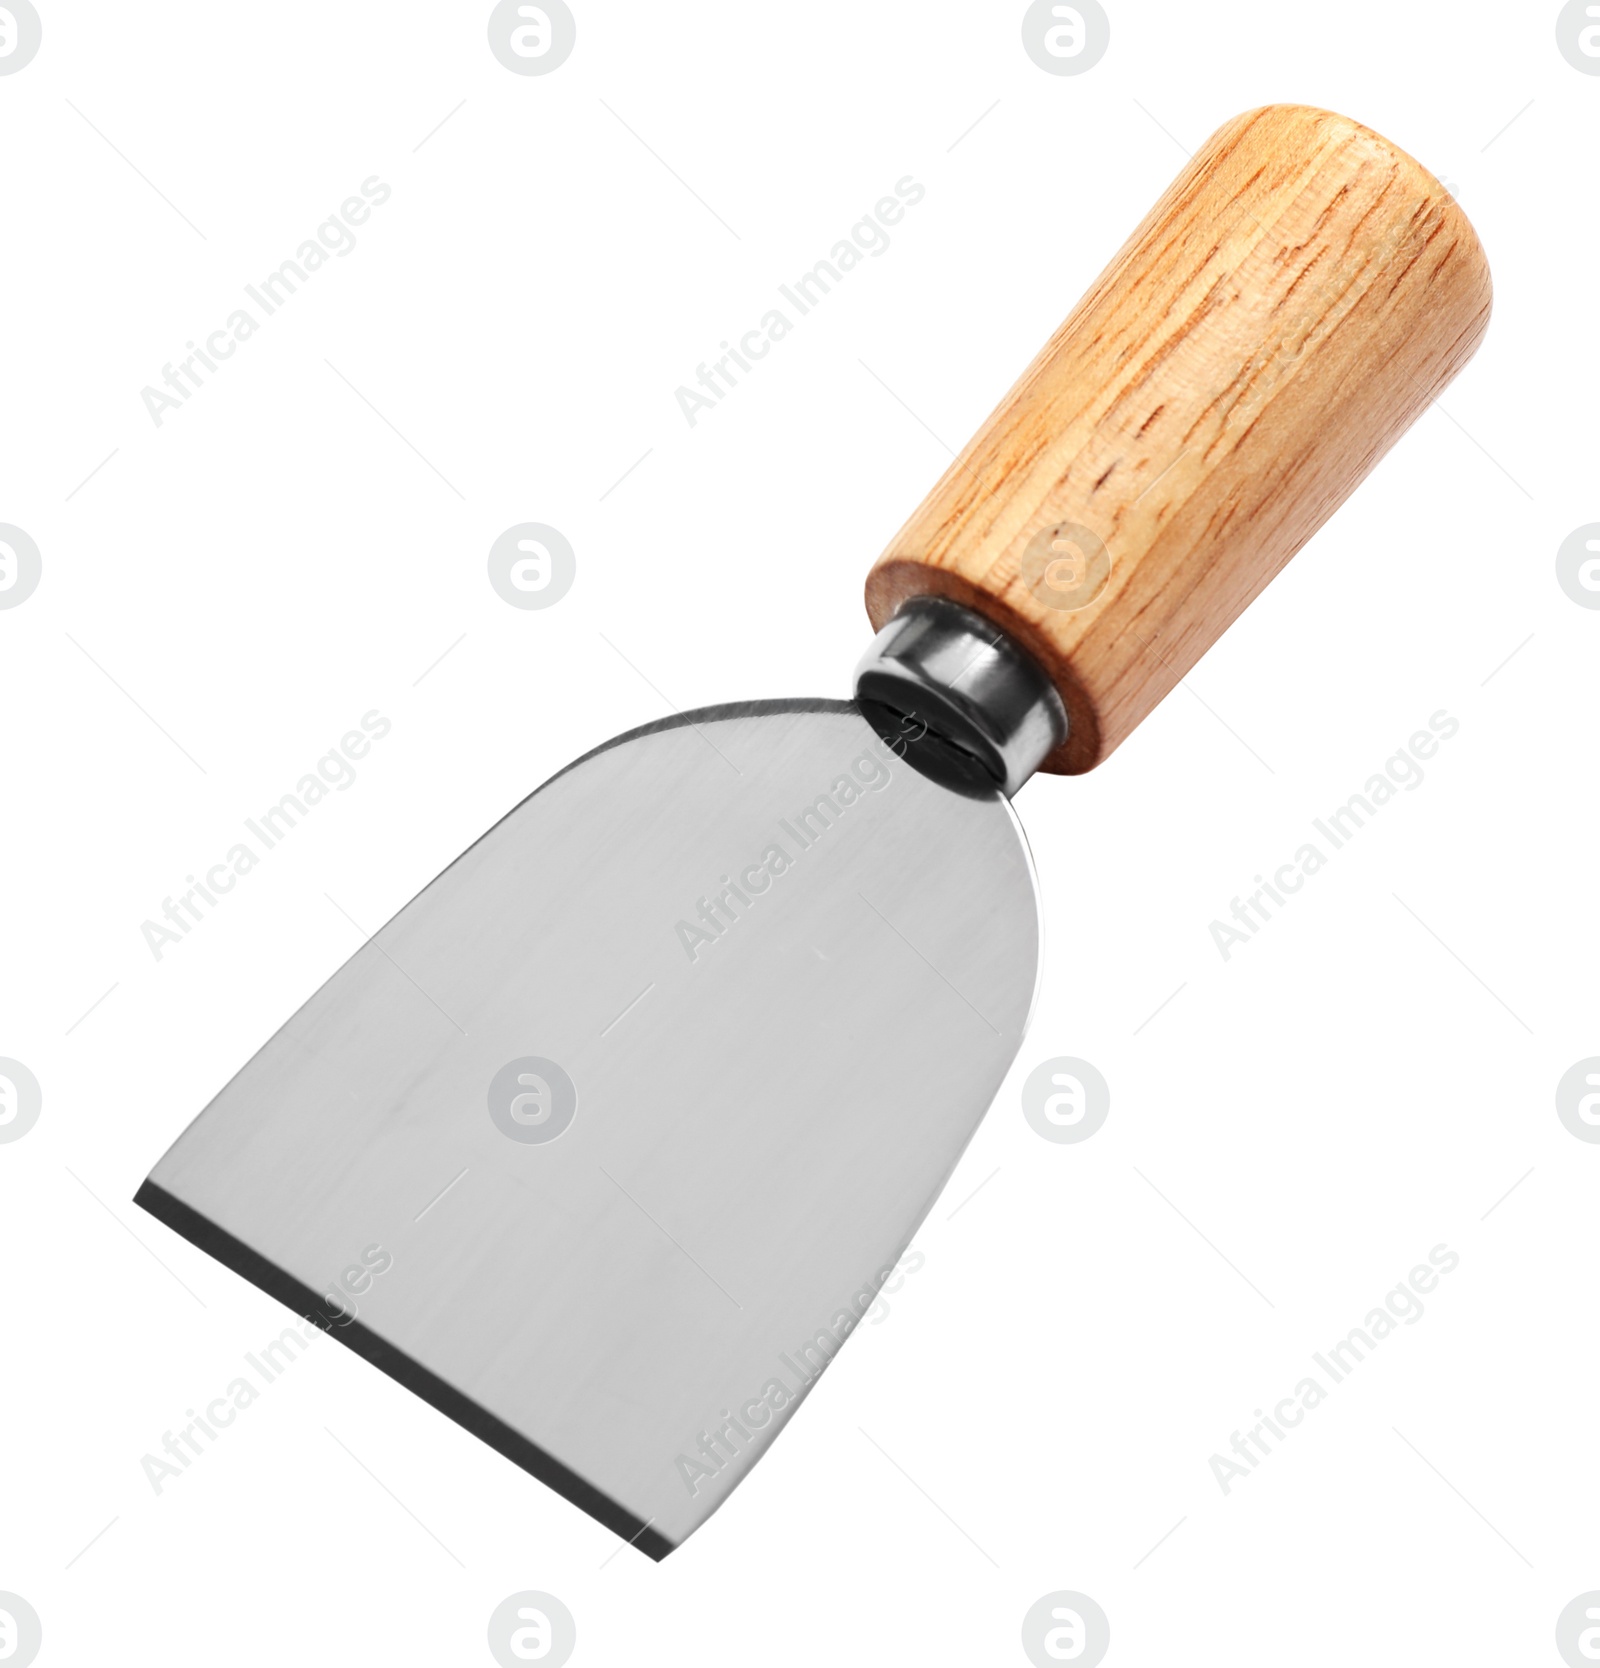 Photo of Cheese knife with wooden handle isolated on white